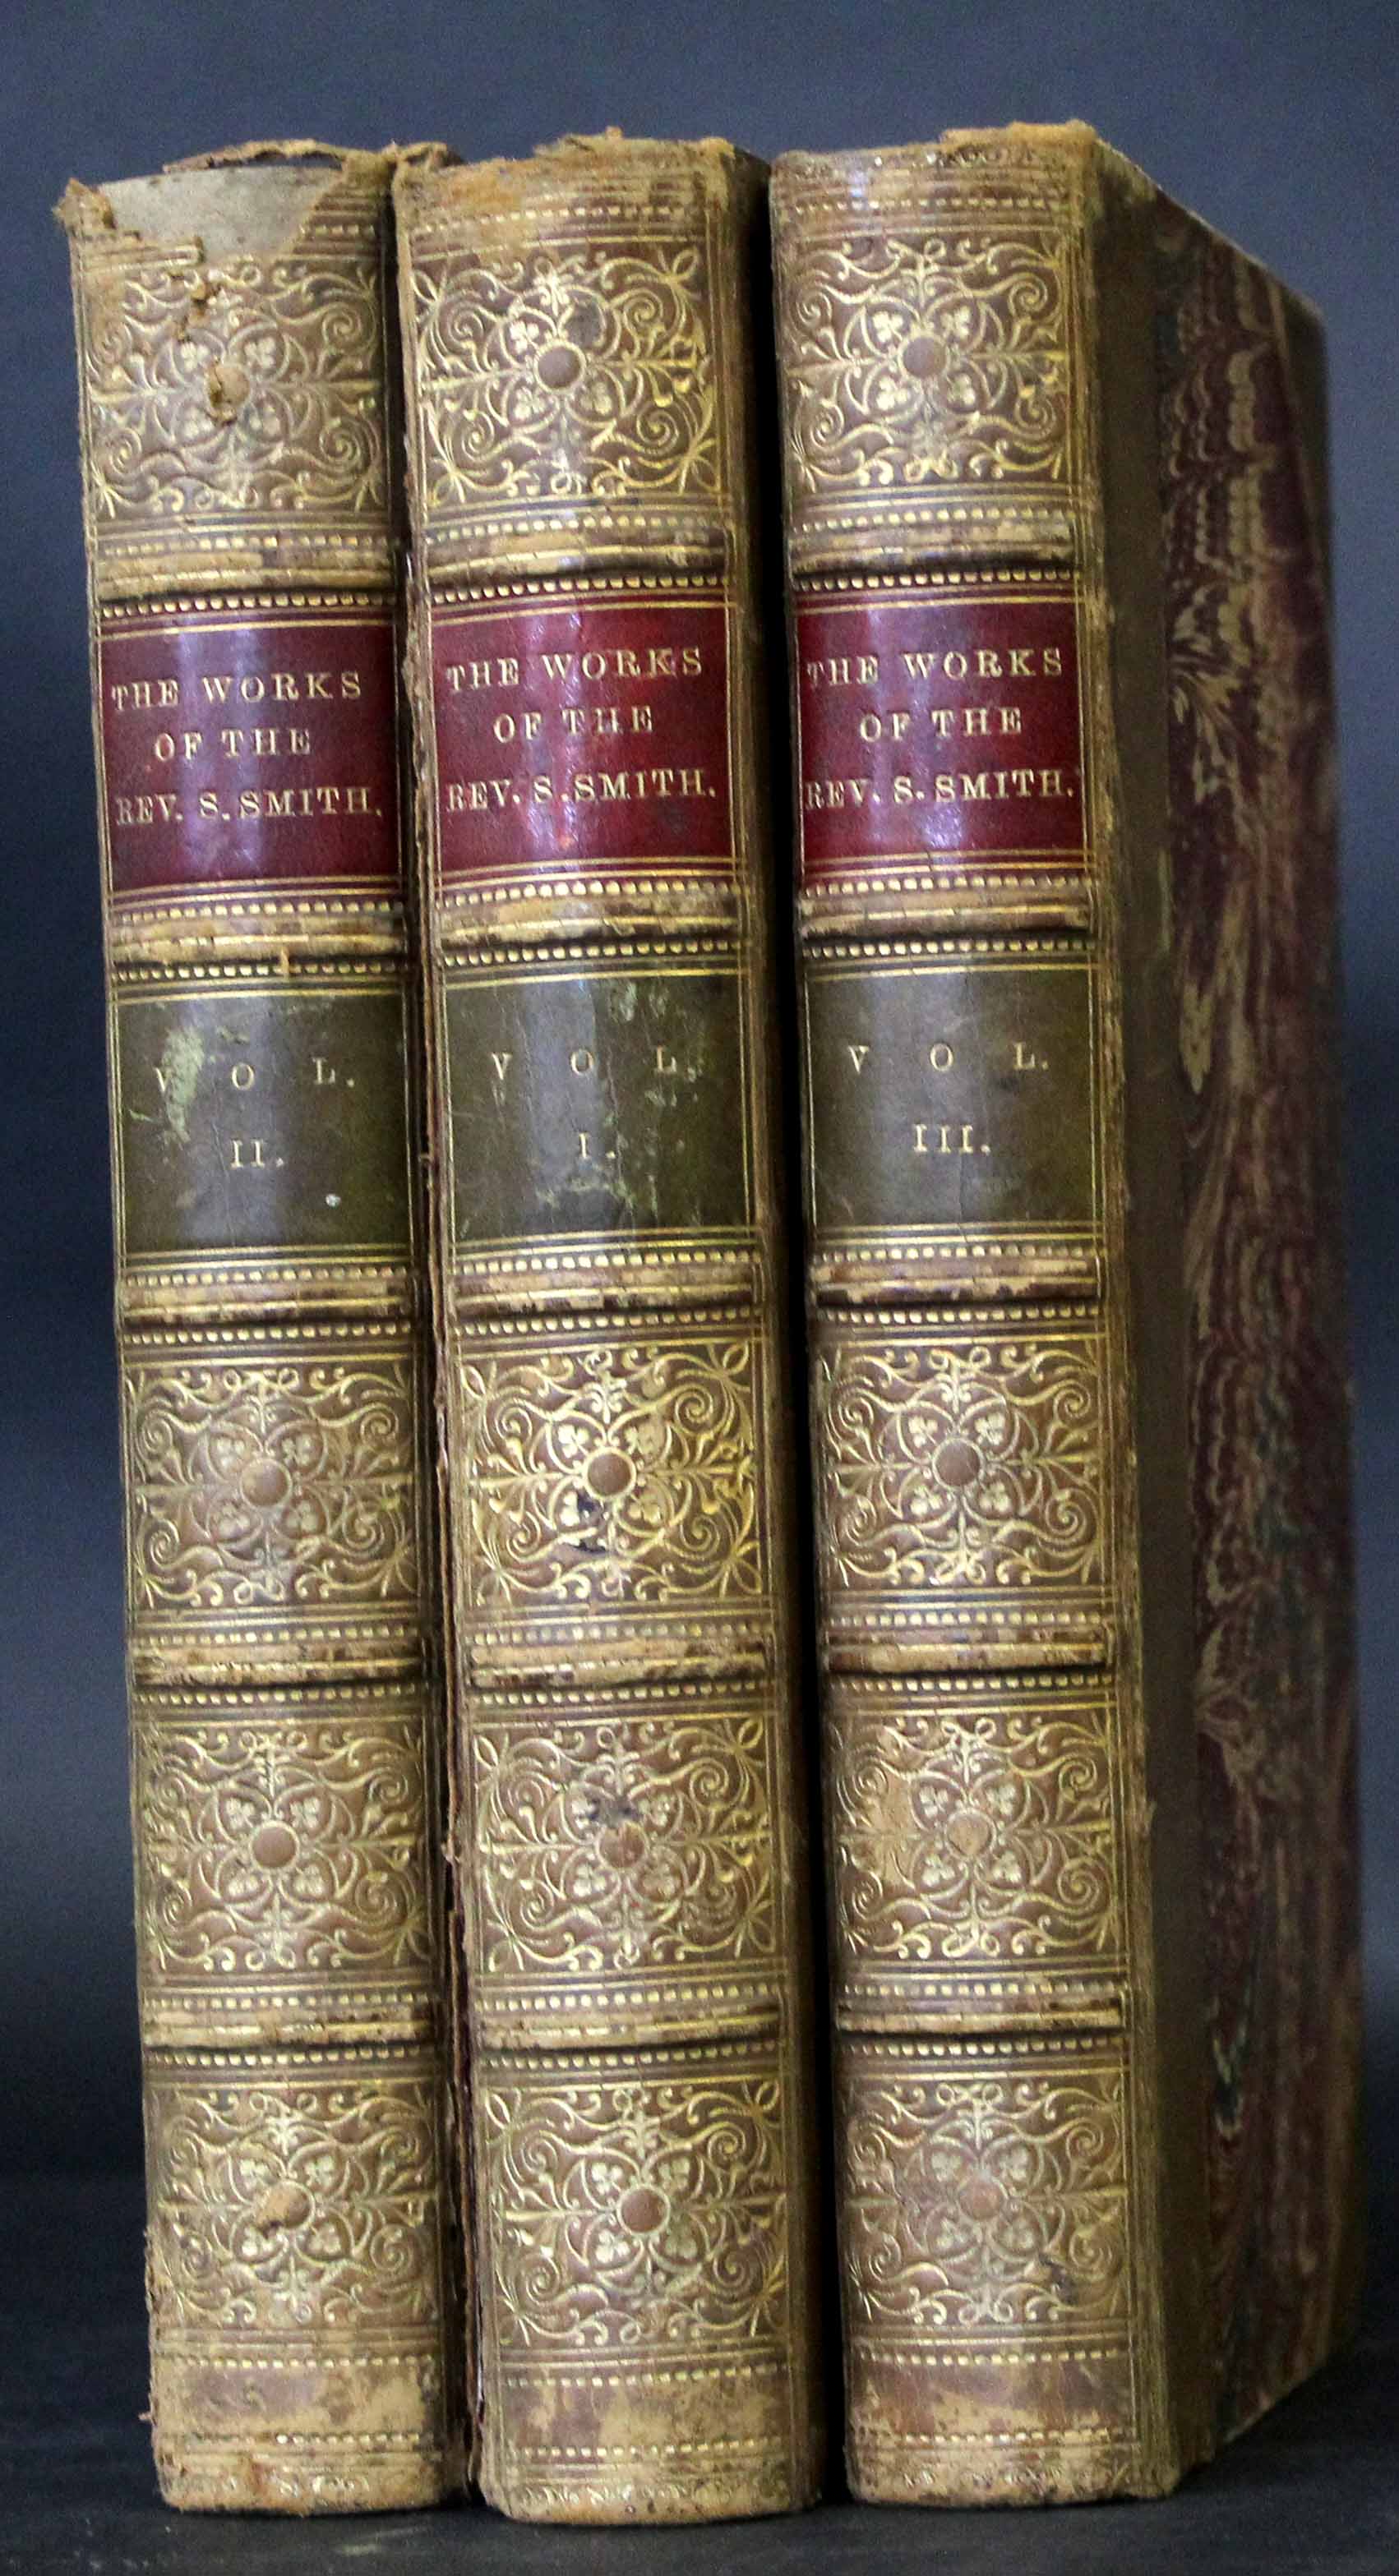 SYDNEY SMITH: THE WORKS, London for Longman, Orme, Brown, Green & Longmans, 1840, 2nd edition, 3 - Image 2 of 2